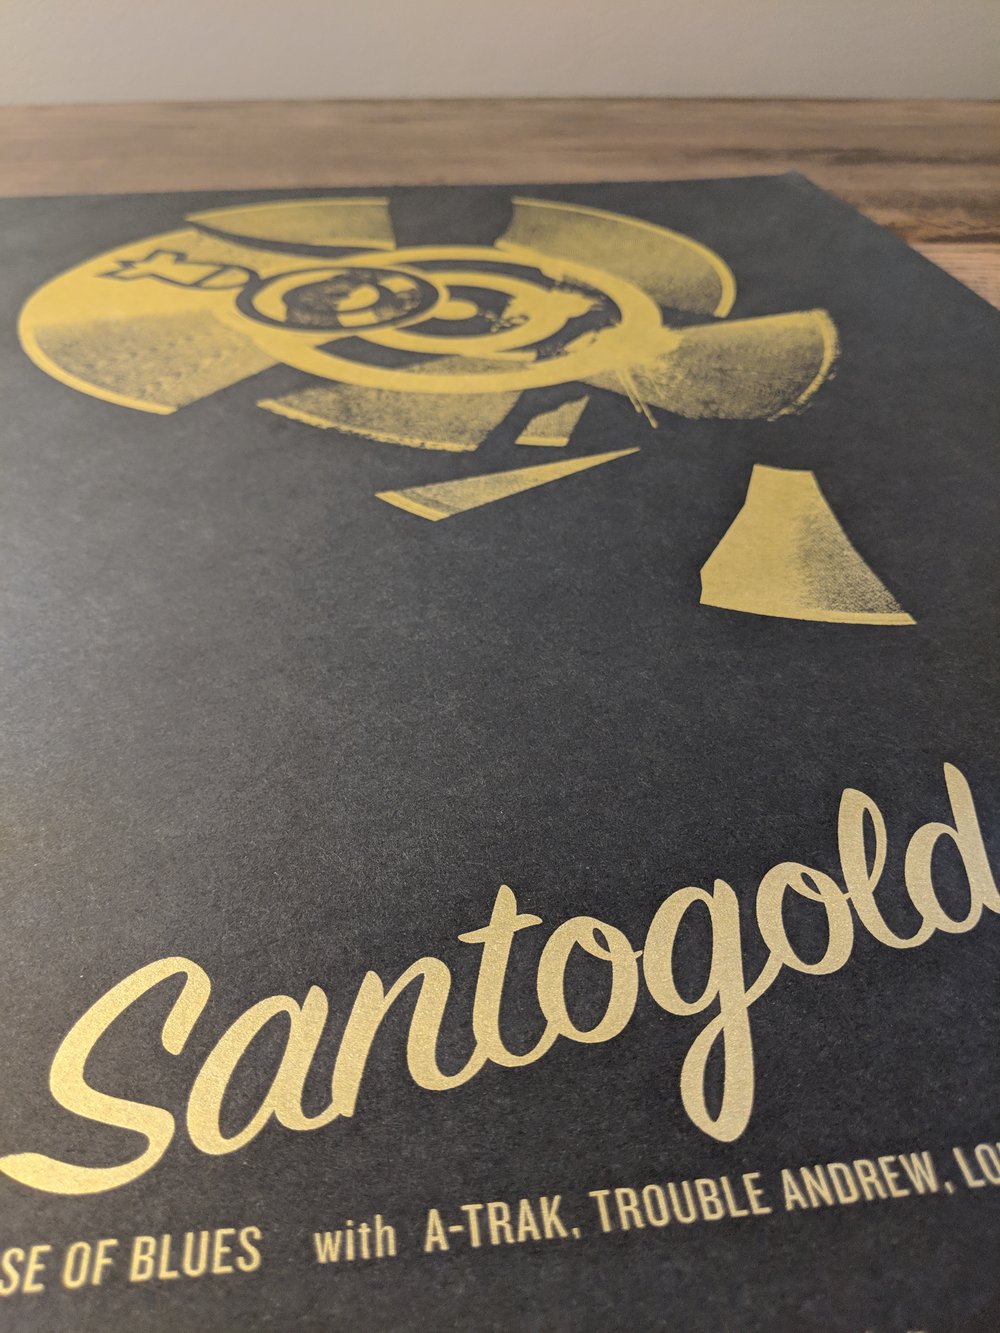 COLLECTOR'S EDITION: 'Santogold' gig poster - **RECENTLY DISCOVERED**